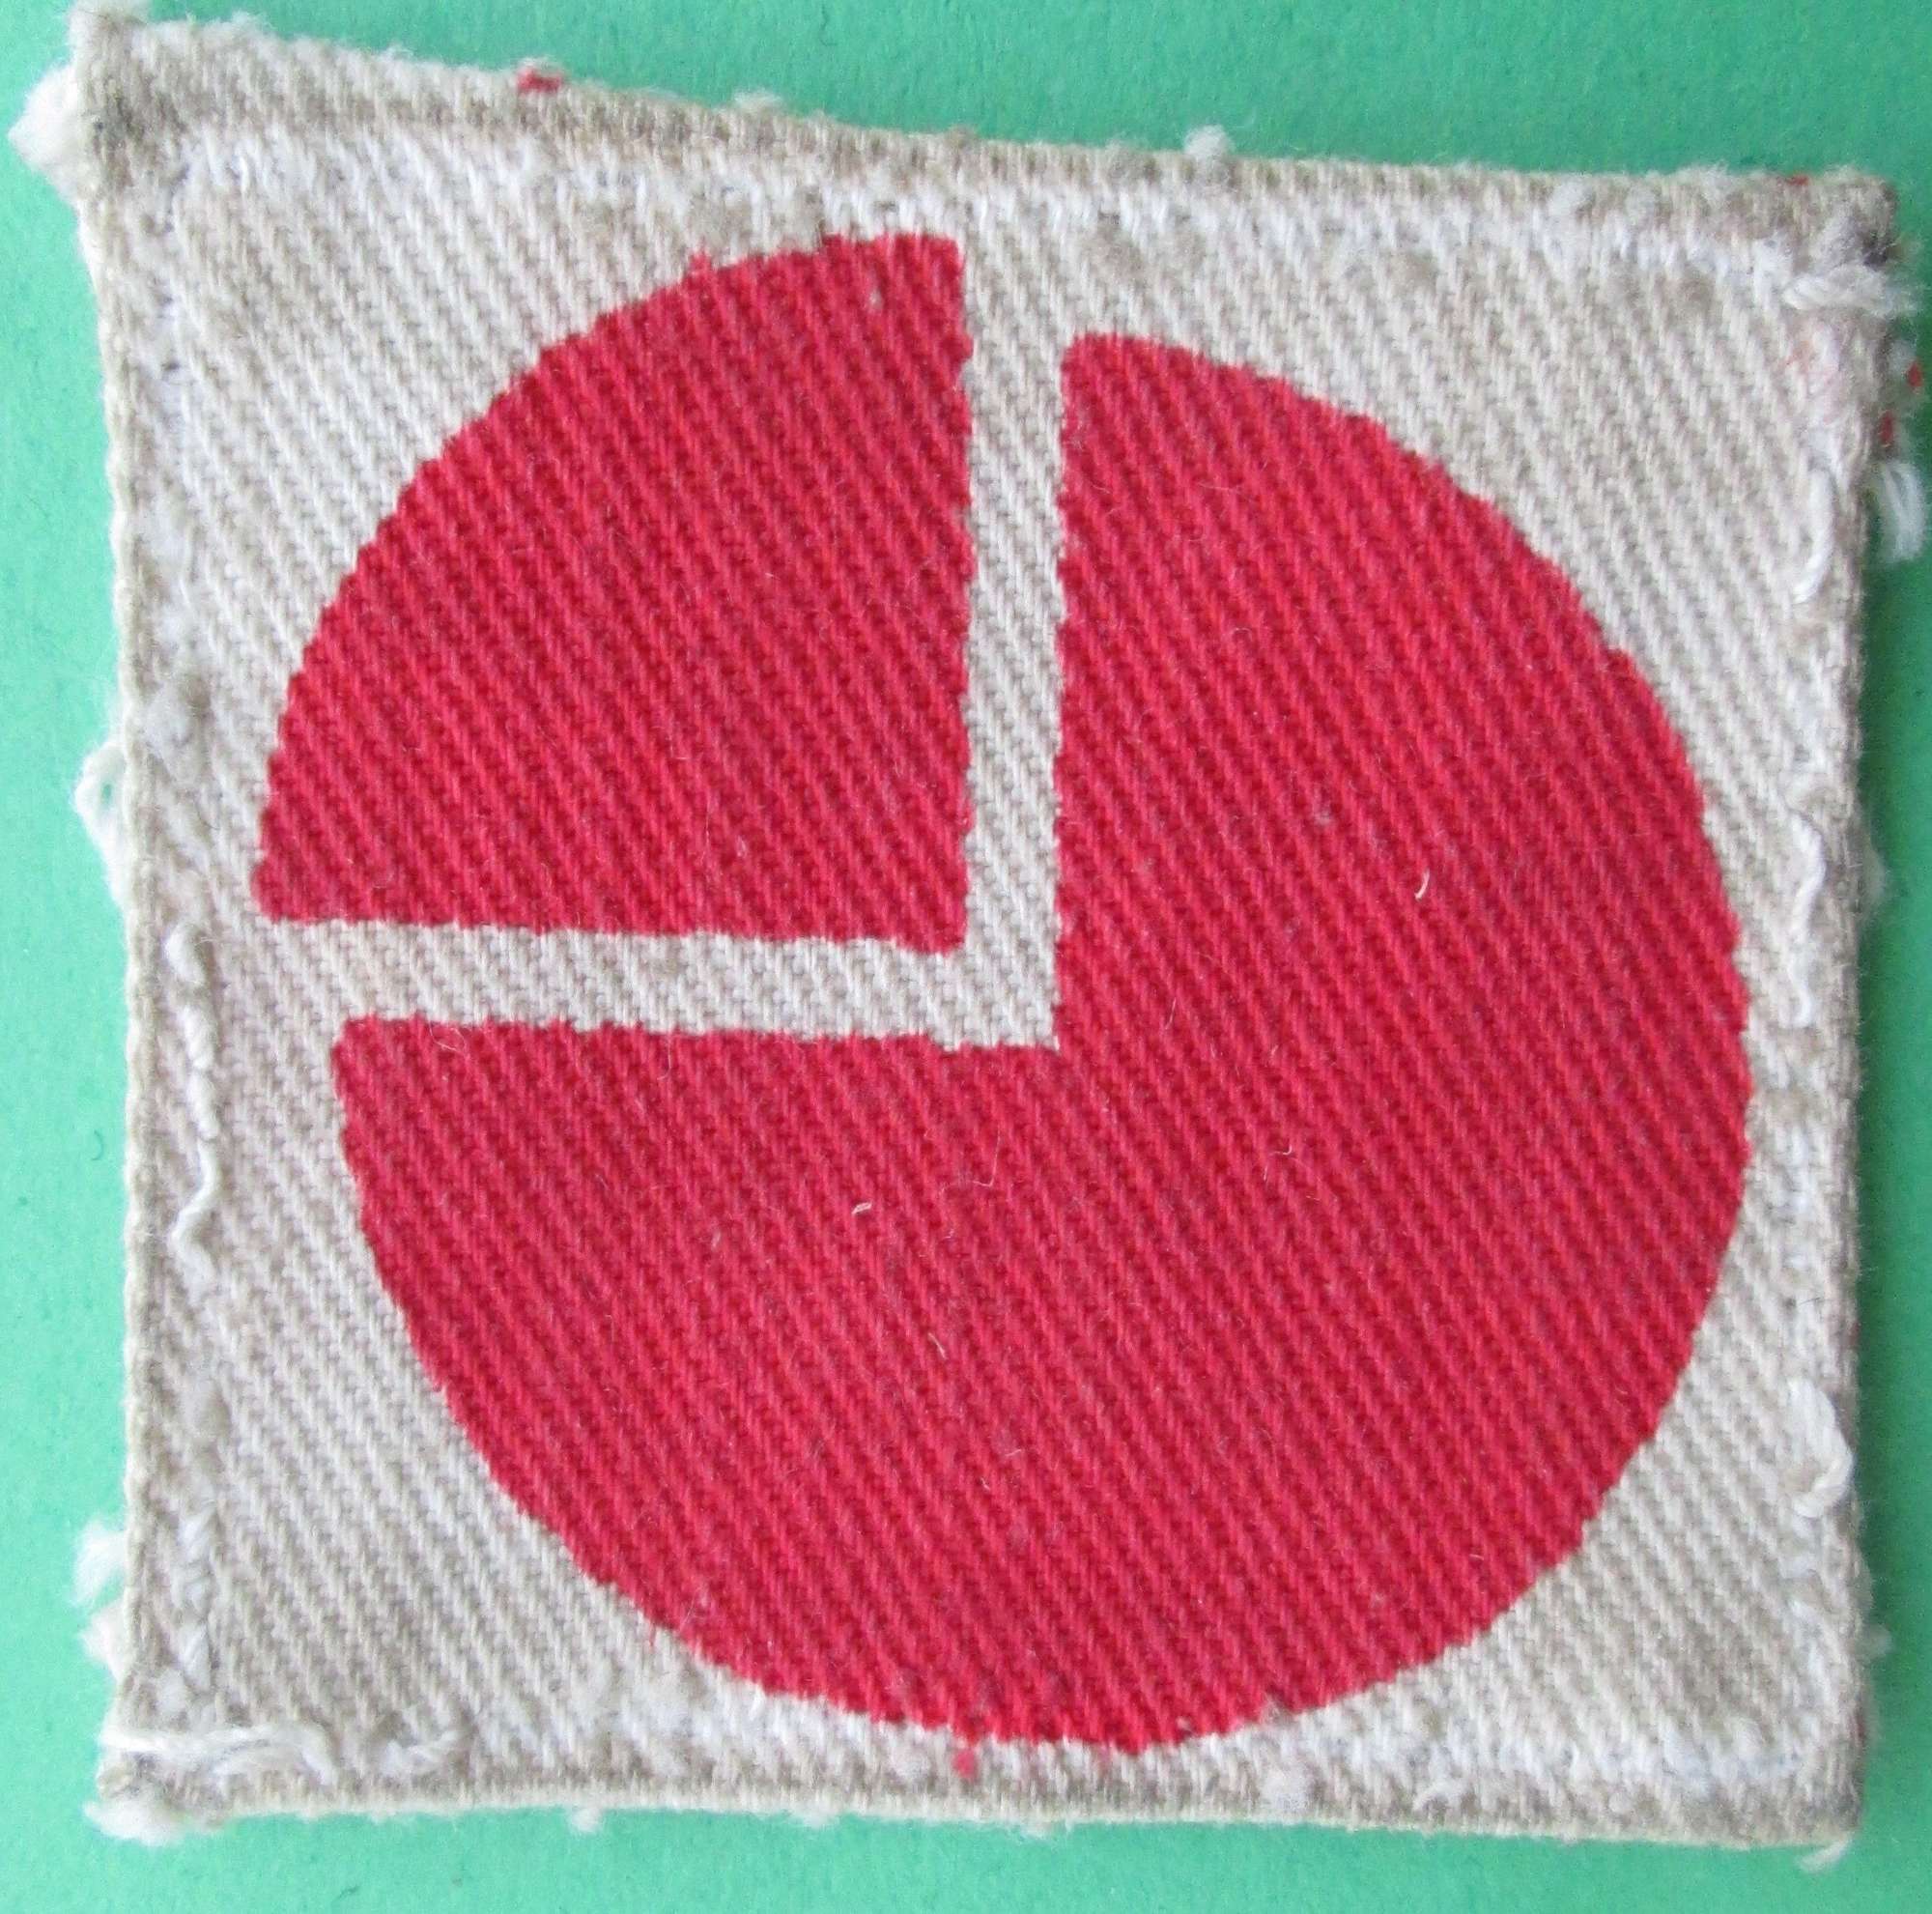 A 2ND PATTERN 4TH DIVISION FORMATION PATCH